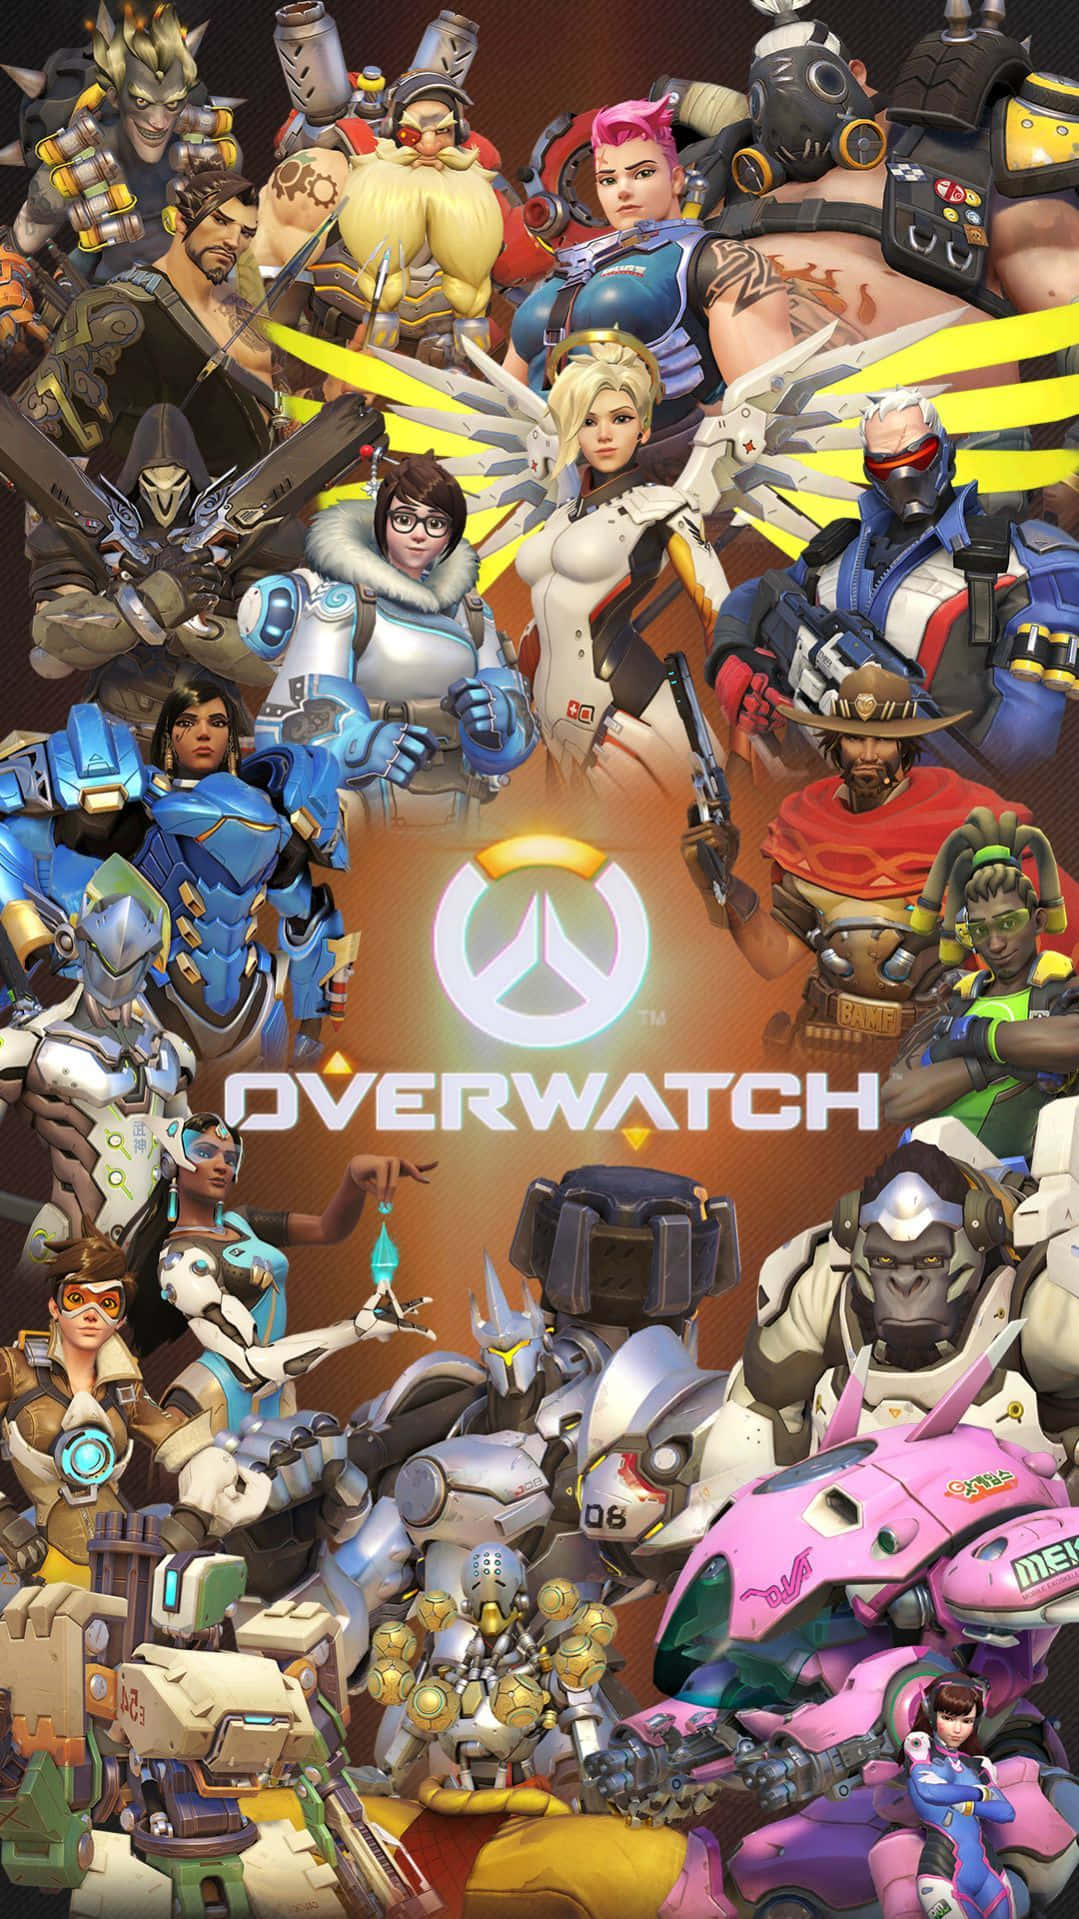 Pixel 3xl Overwatch Background Game Cover